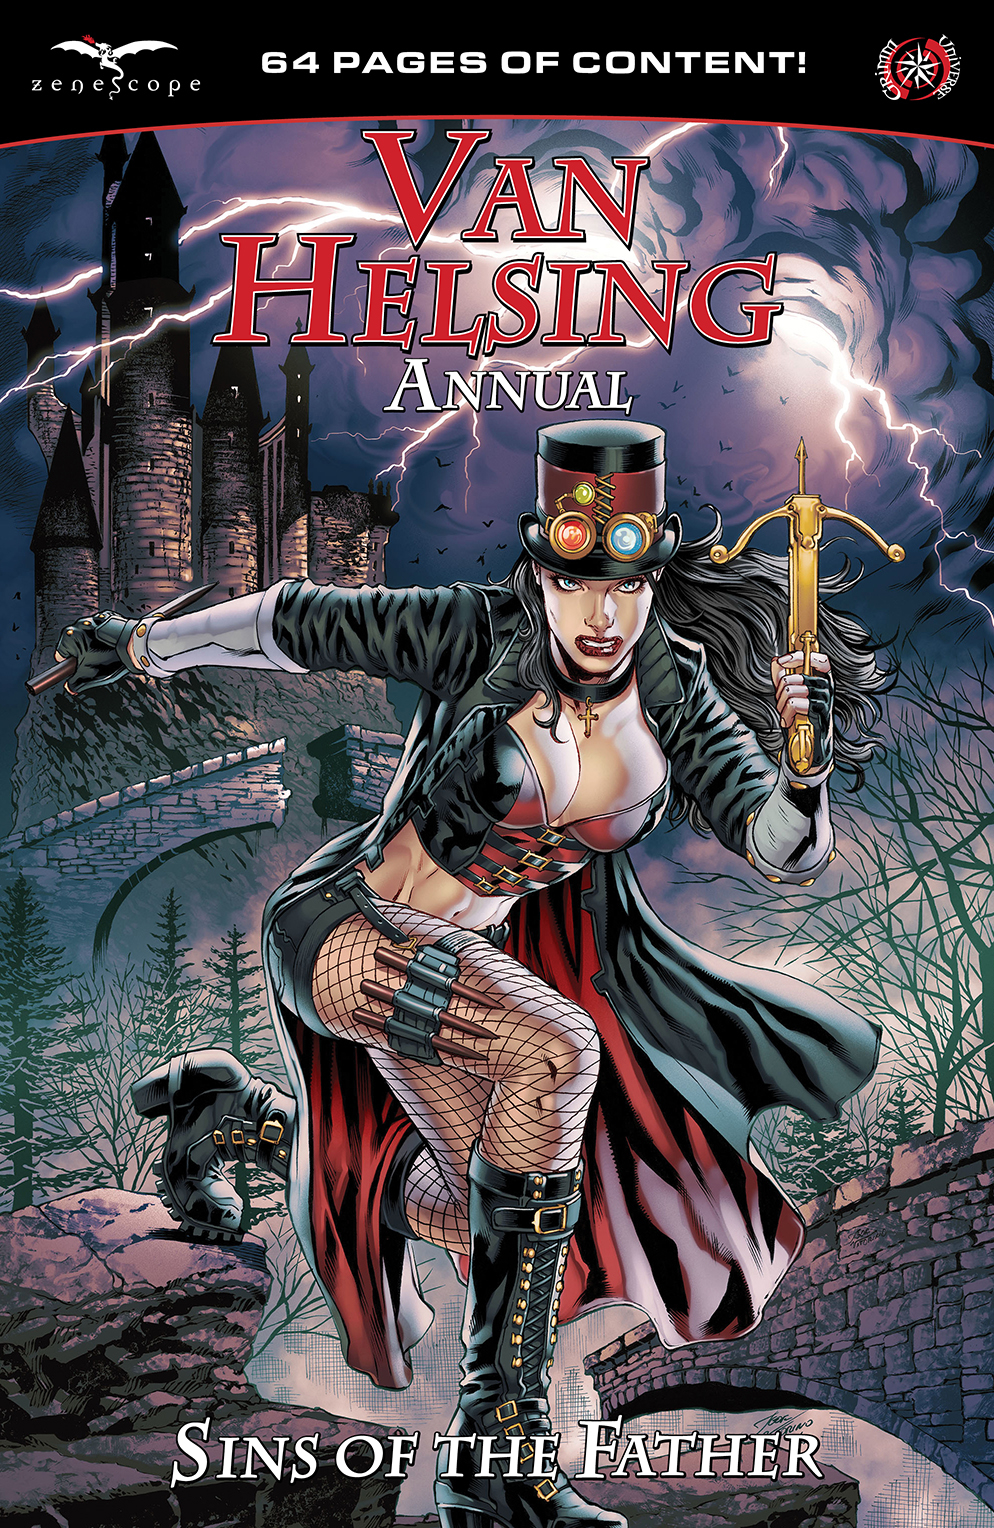 Van Helsing Annual Sins of the Father #3 Cover A Vitorino